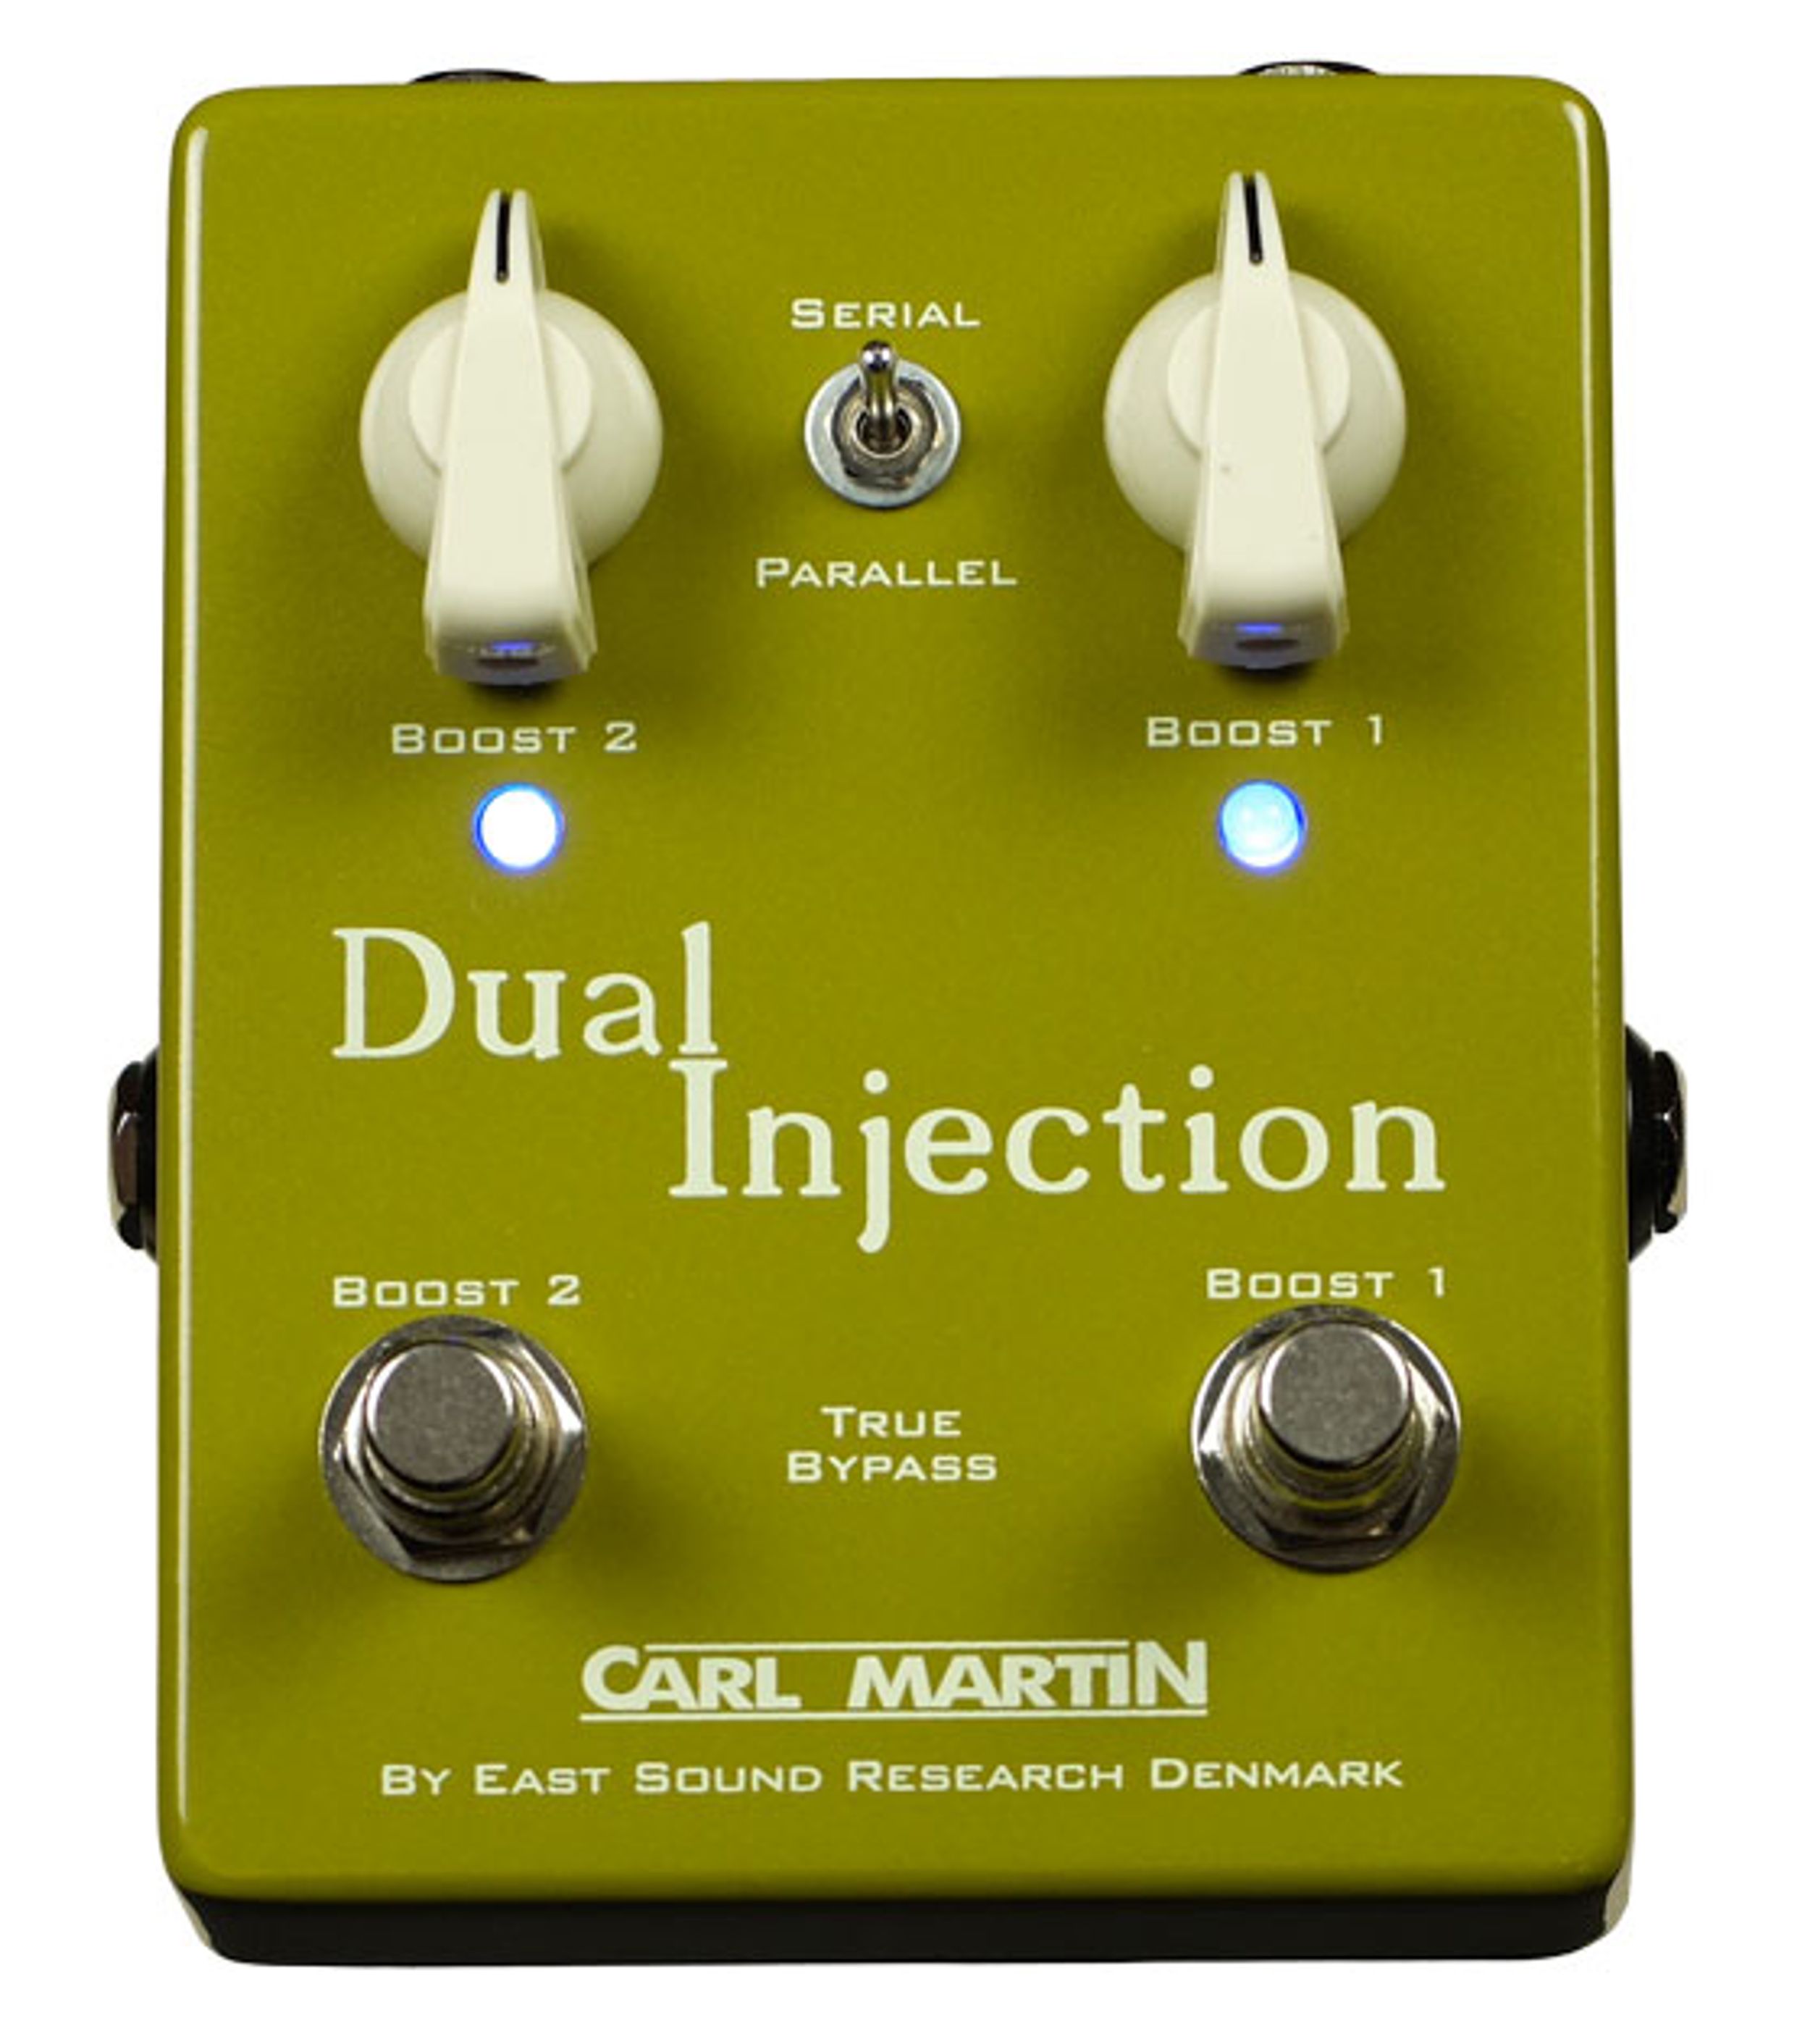 Carl Martin Announces the Dual Injection